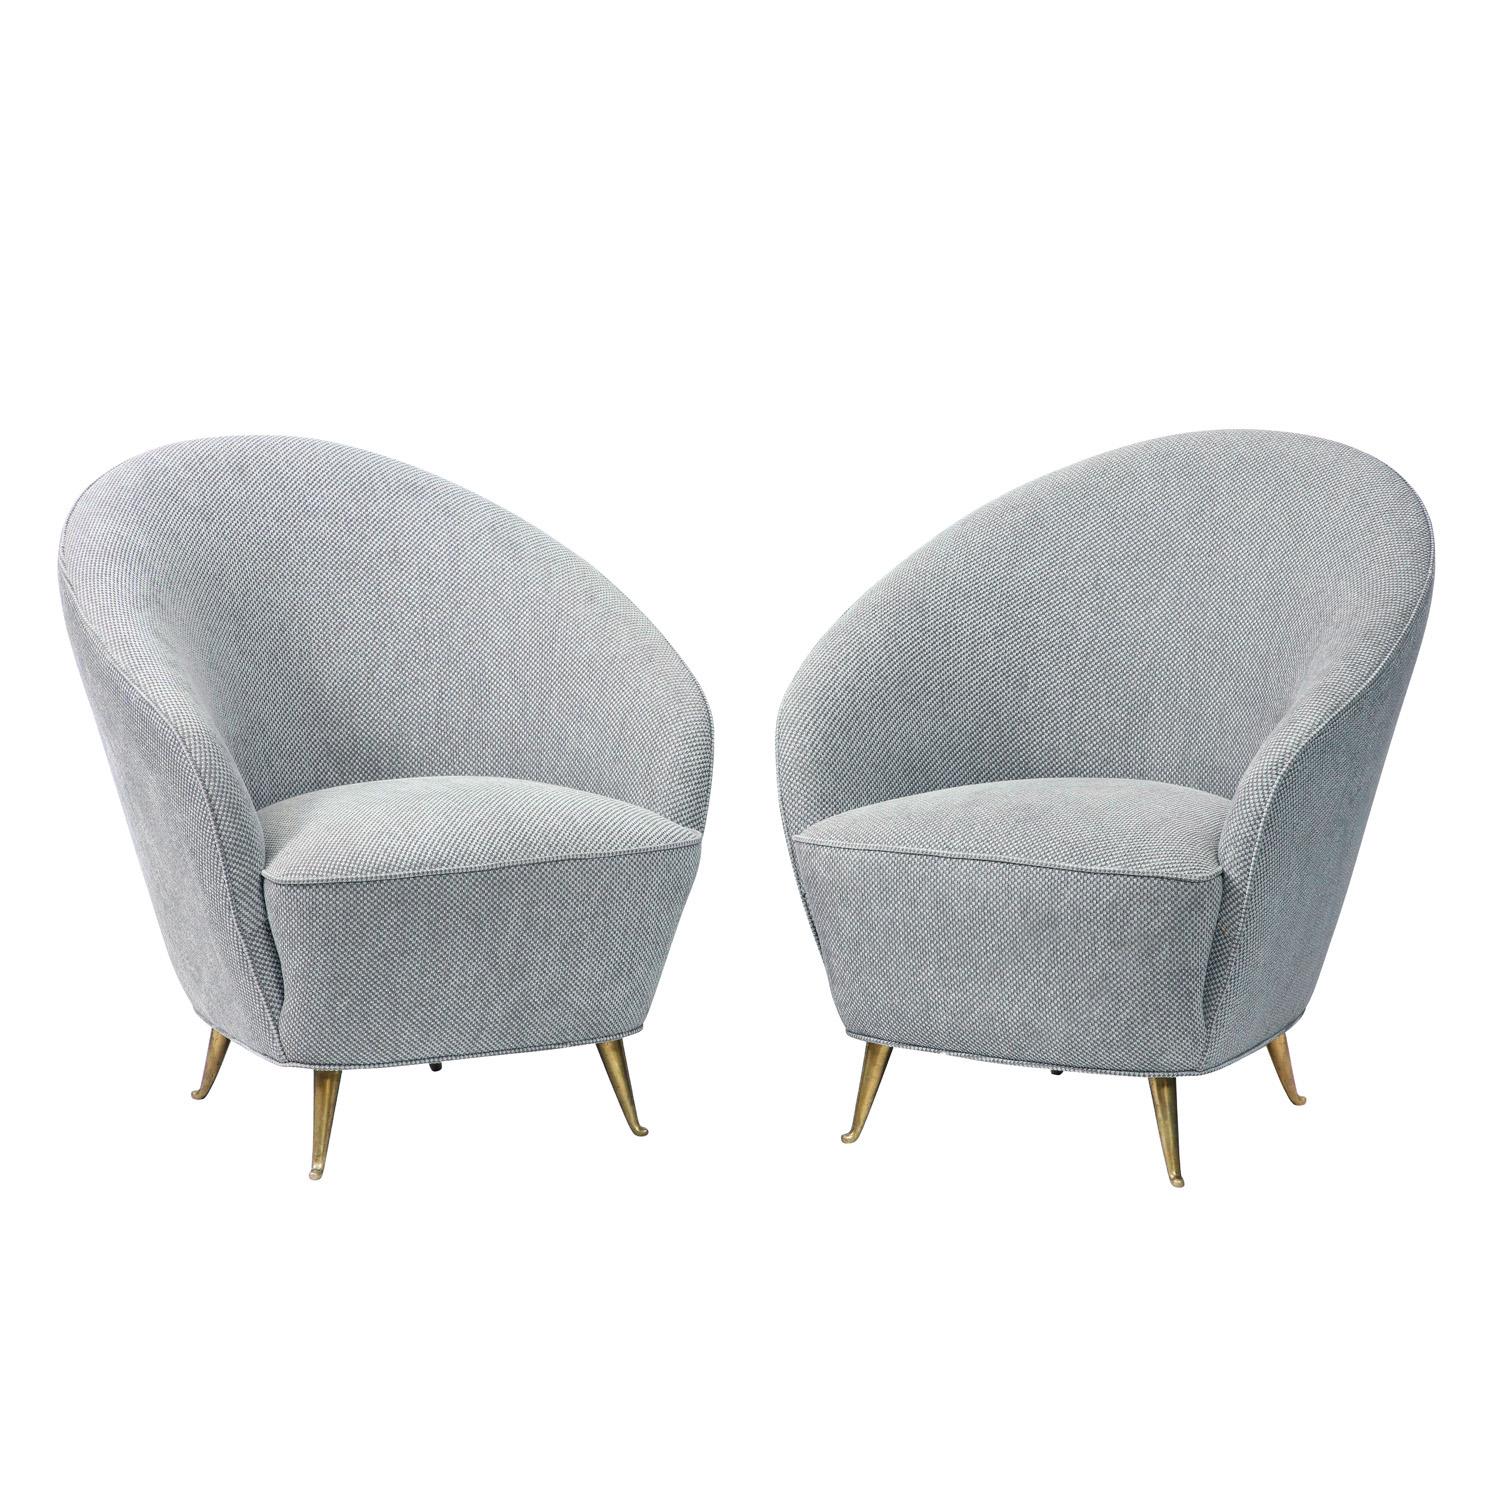 Pair of elegant curved back lounge chairs with solid brass legs, Italian 1950's.  These have been newly reupholstered by Lobel Modern in a beautiful blue/gray fabric.  They are extremely chic and comfortable.  